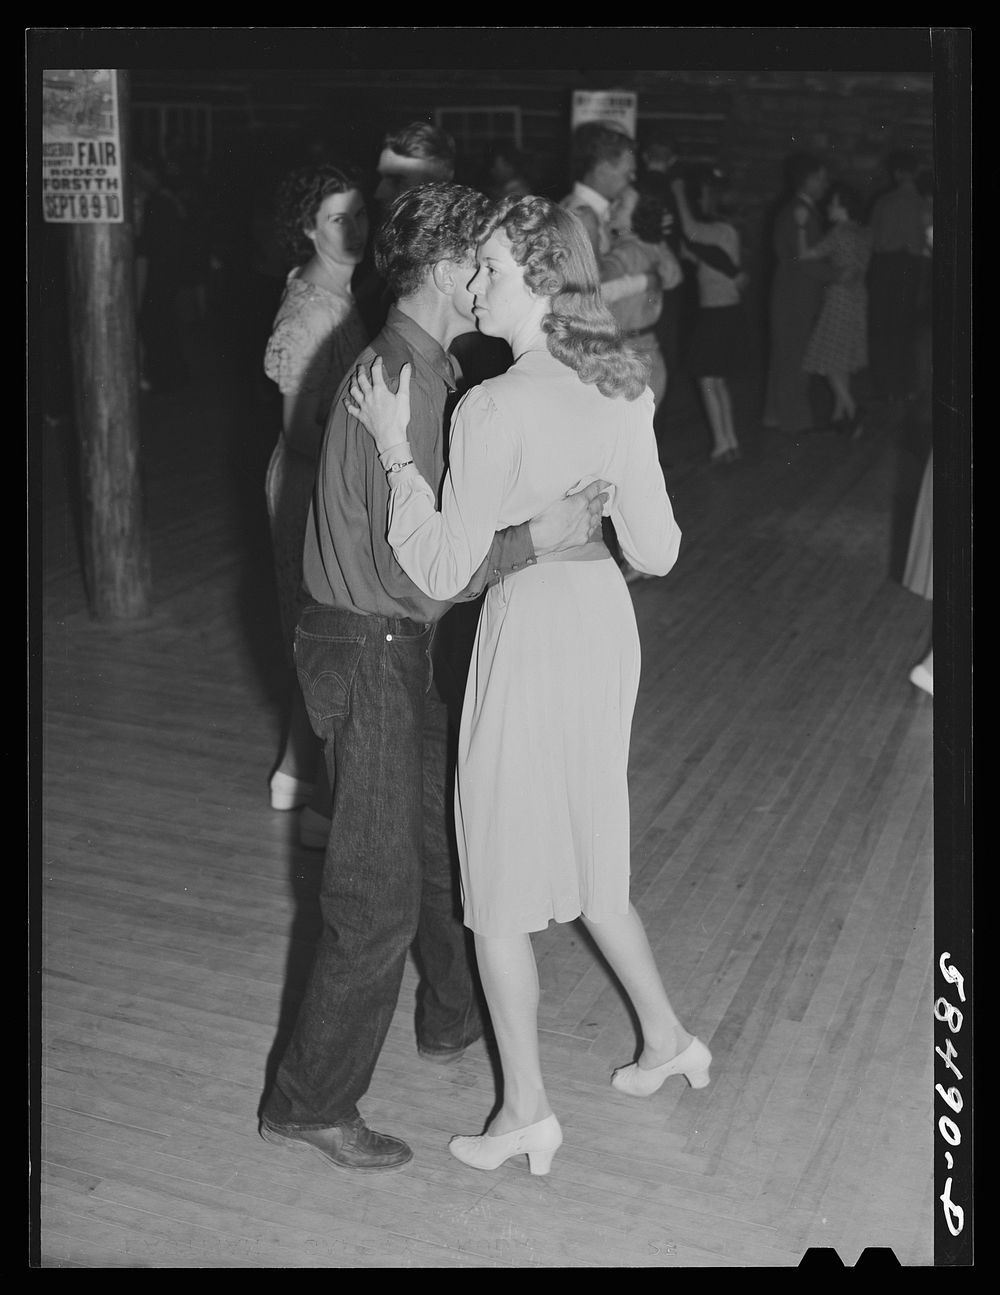 Dancing on Saturday night in Birney, Montana. Sourced from the Library of Congress.